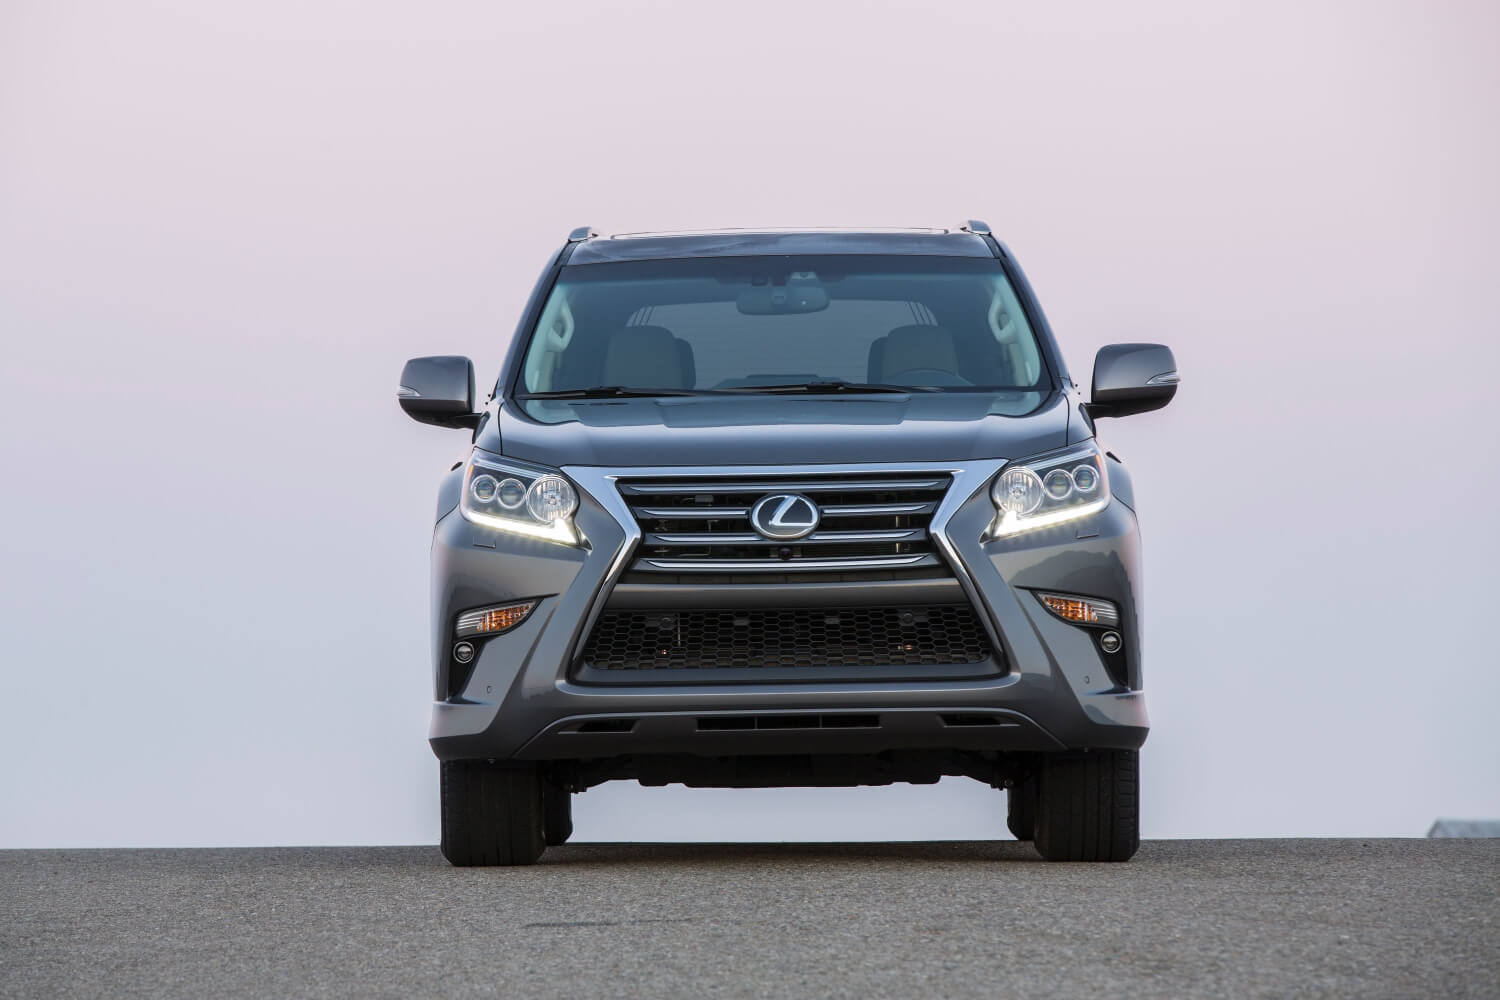 The most reliable used SUVs include this 2018 Lexus GX